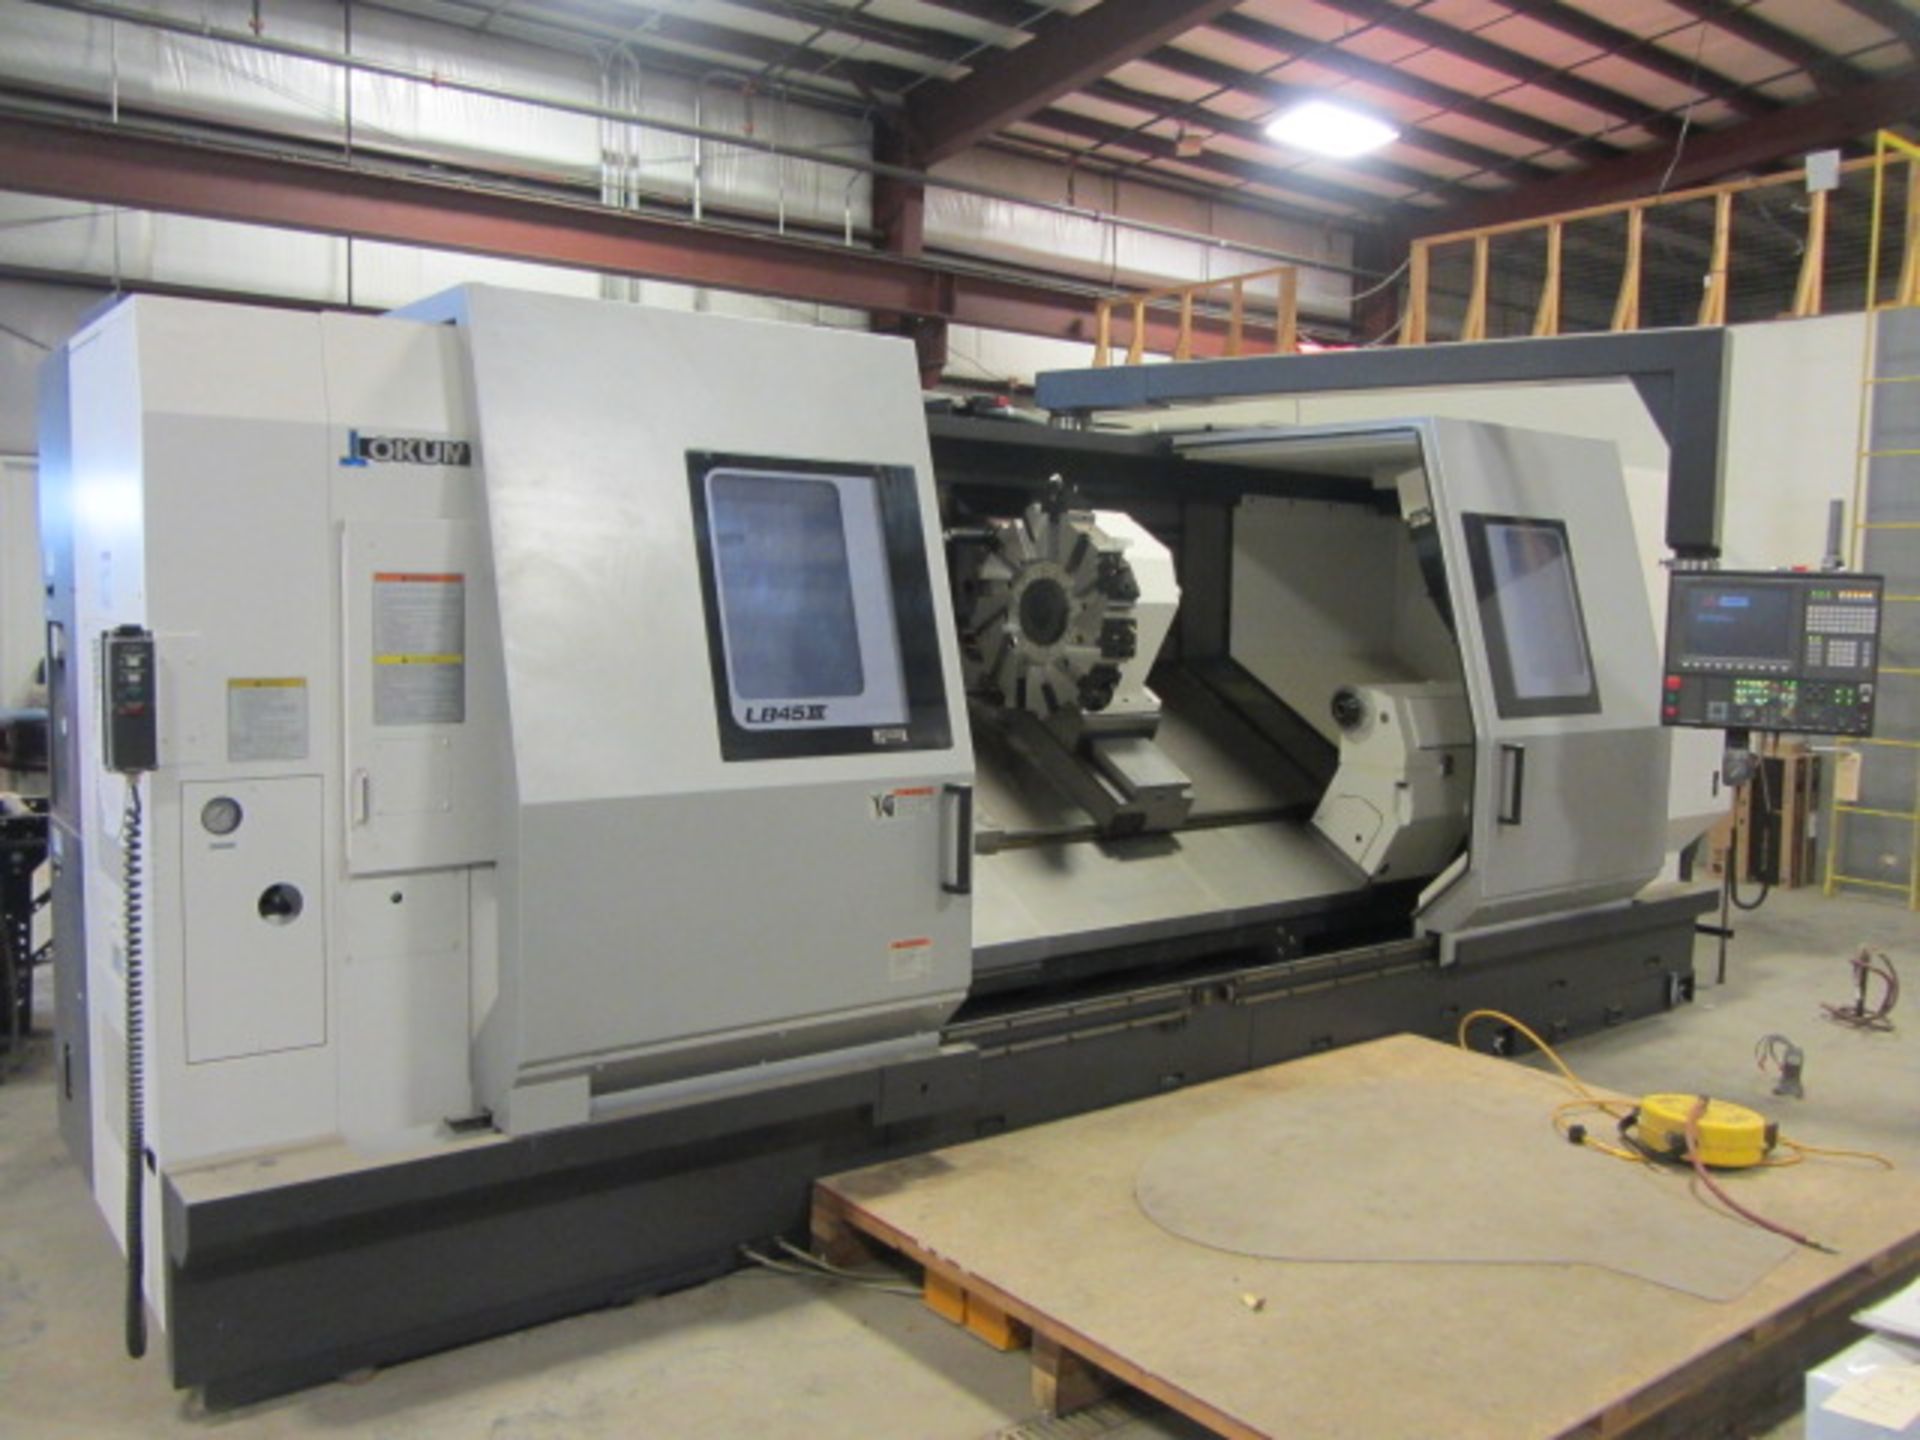 Okuma Model LB45II C2000 Hollow Spindle CNC Turning Center with Dual Front & Rear 24'' 4-Jaw Chucks,